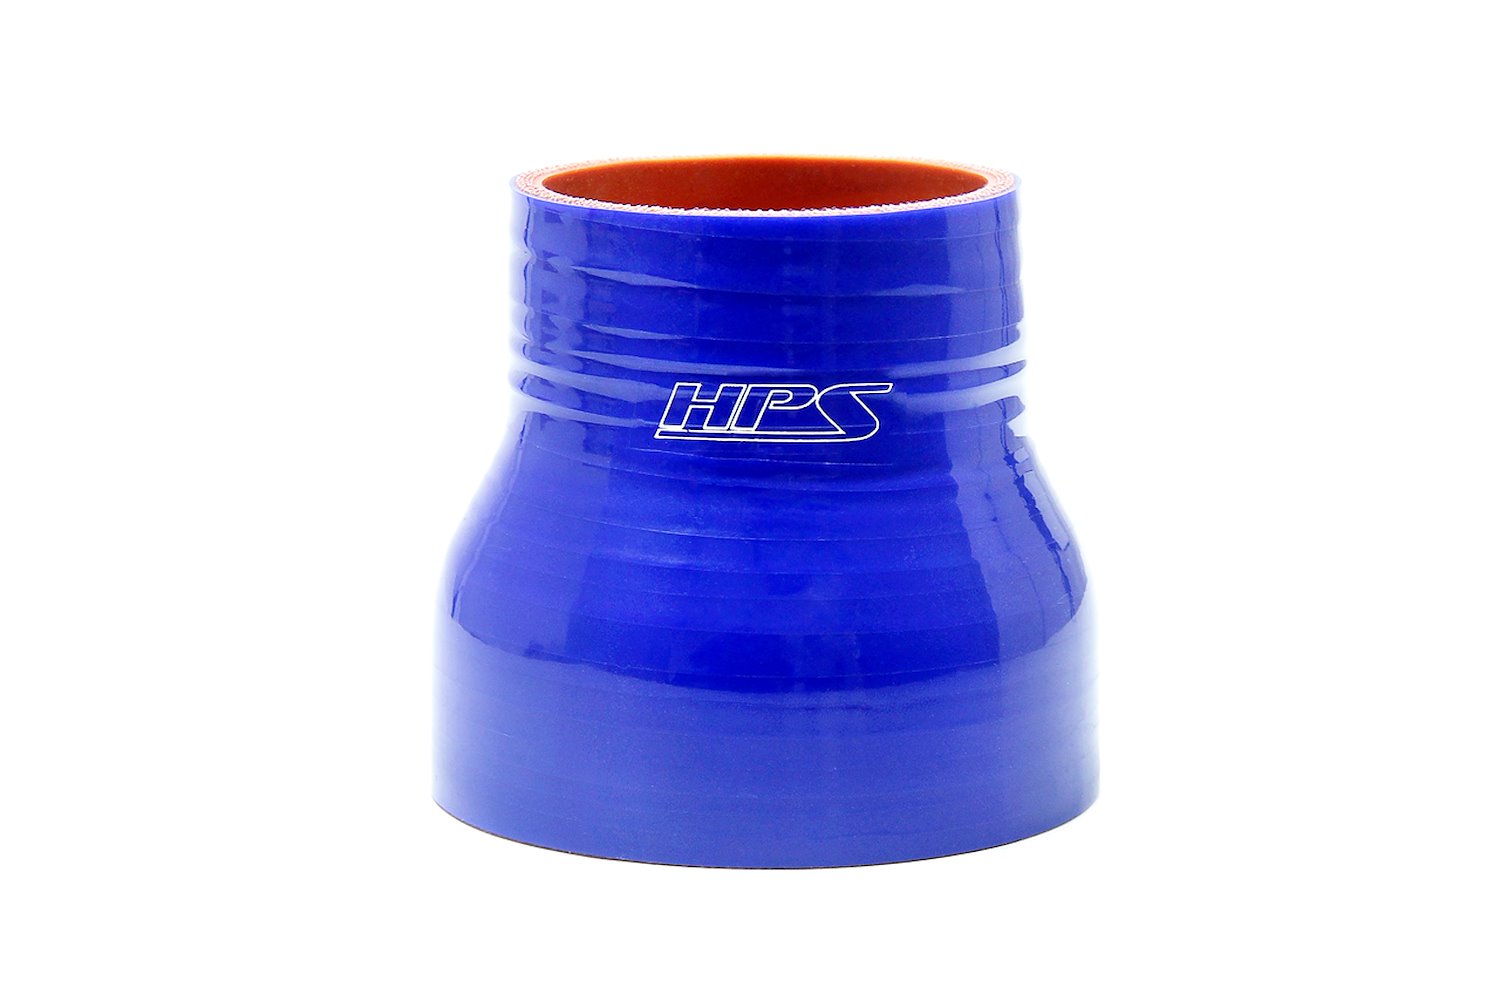 HTSR-300-400-L4-BLUE Silicone Reducer Hose, High-Temp 4-Ply Reinforced, 3 in. - 4 in. ID, 4 in. Long, Blue